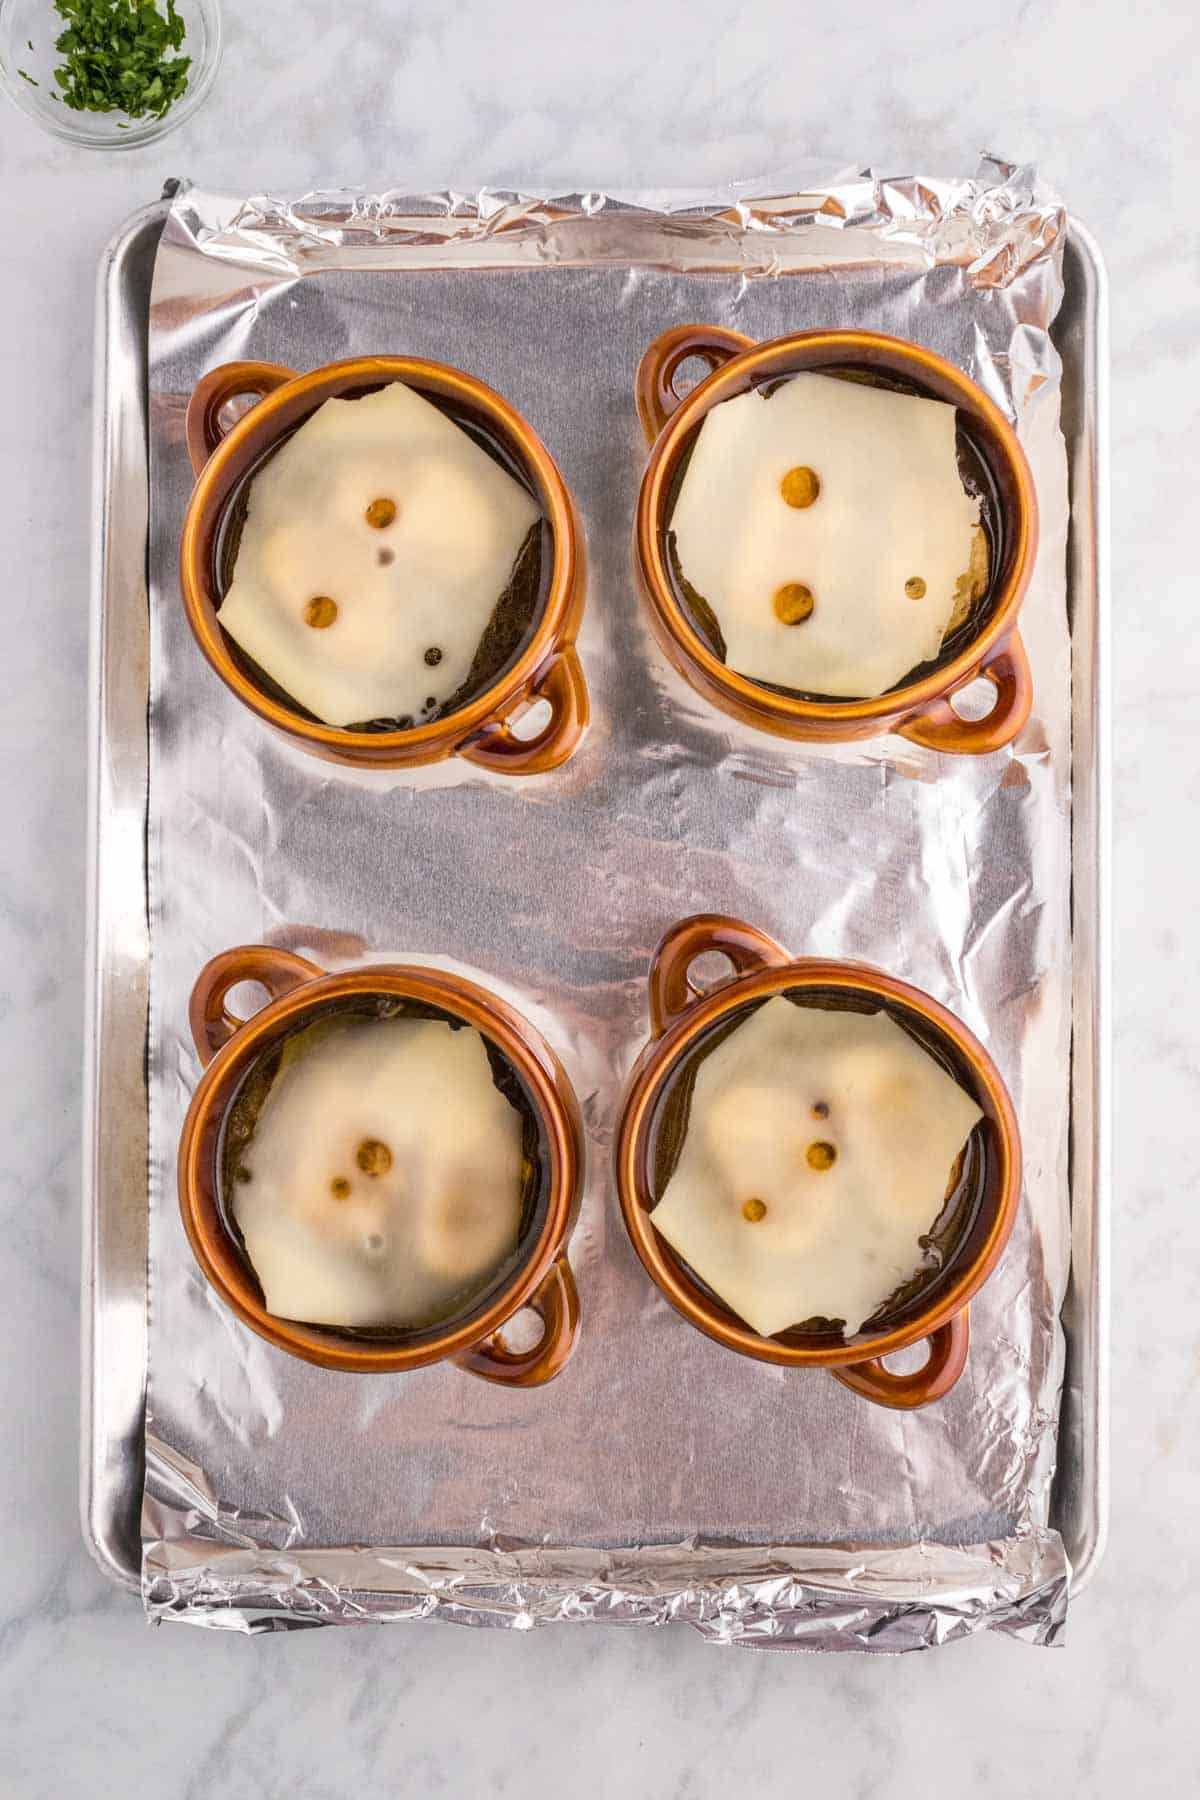 Swiss cheese slices on top of French onion soup before broiling